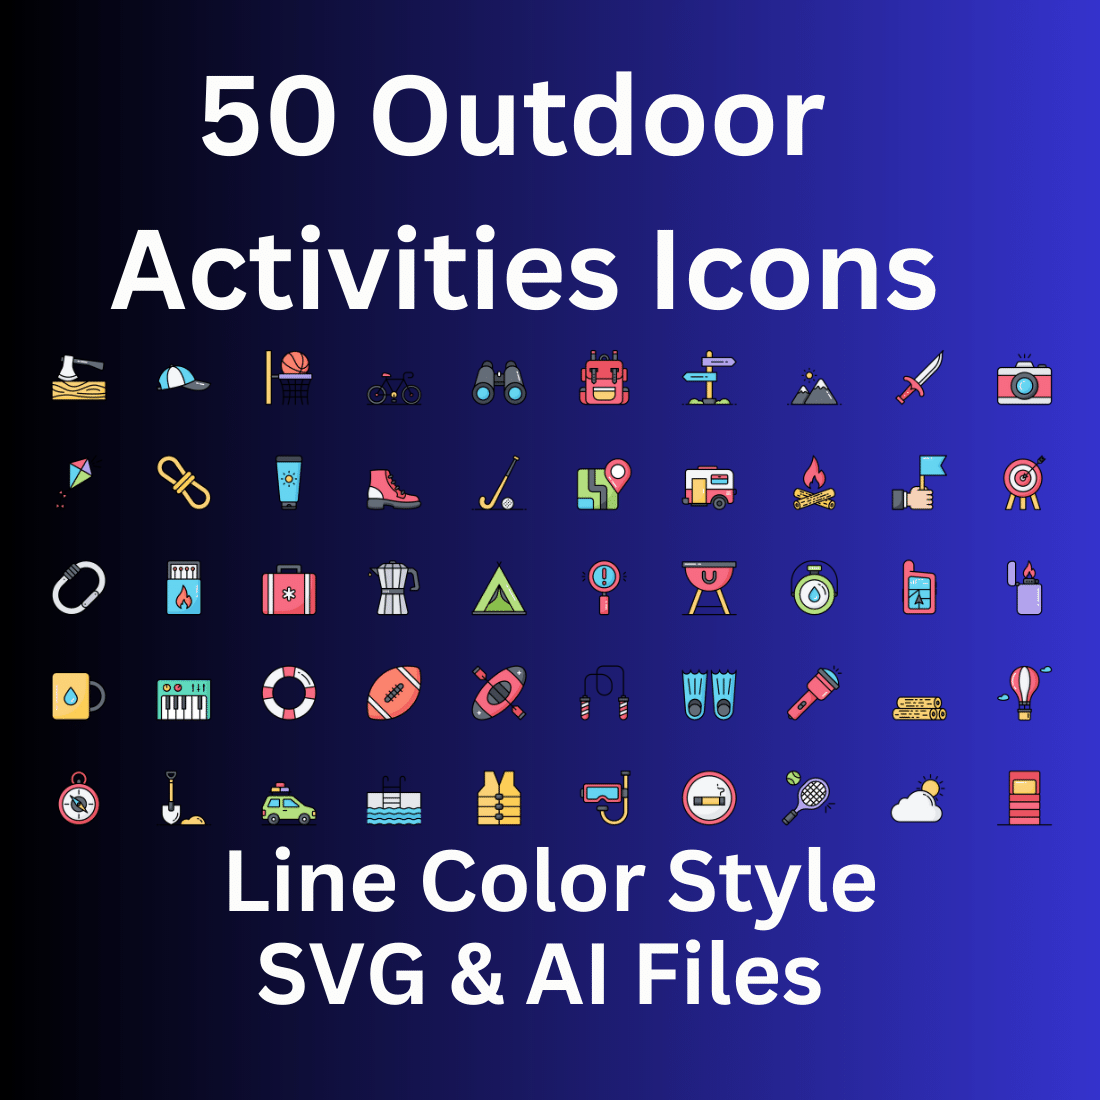 Outdoor Activities Icon Set 50 Line Color Icons - SVG And AI Files preview image.